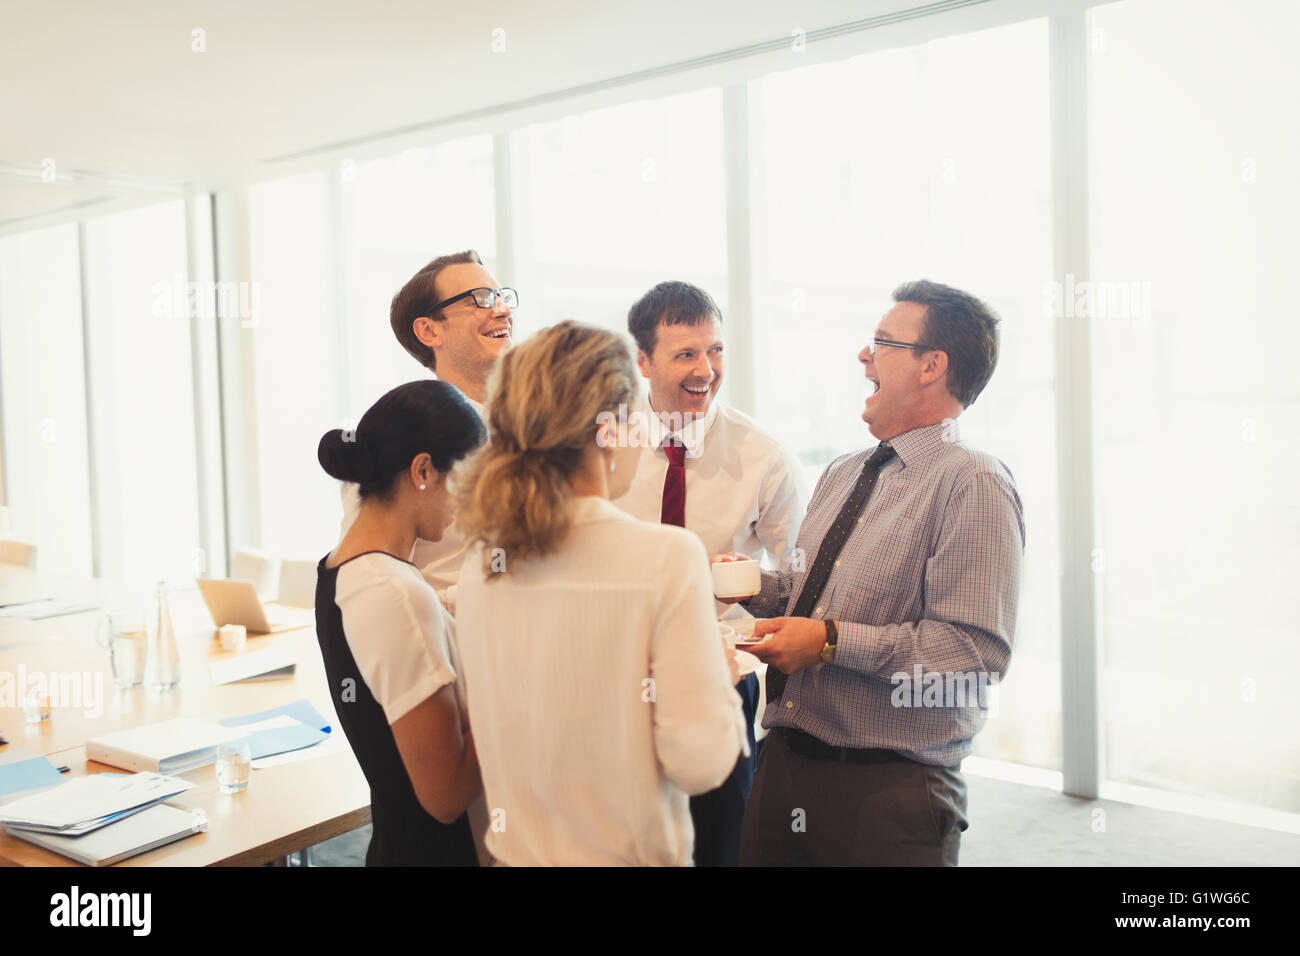 Laughing business people enjoying coffee break in conference room Stock Photo